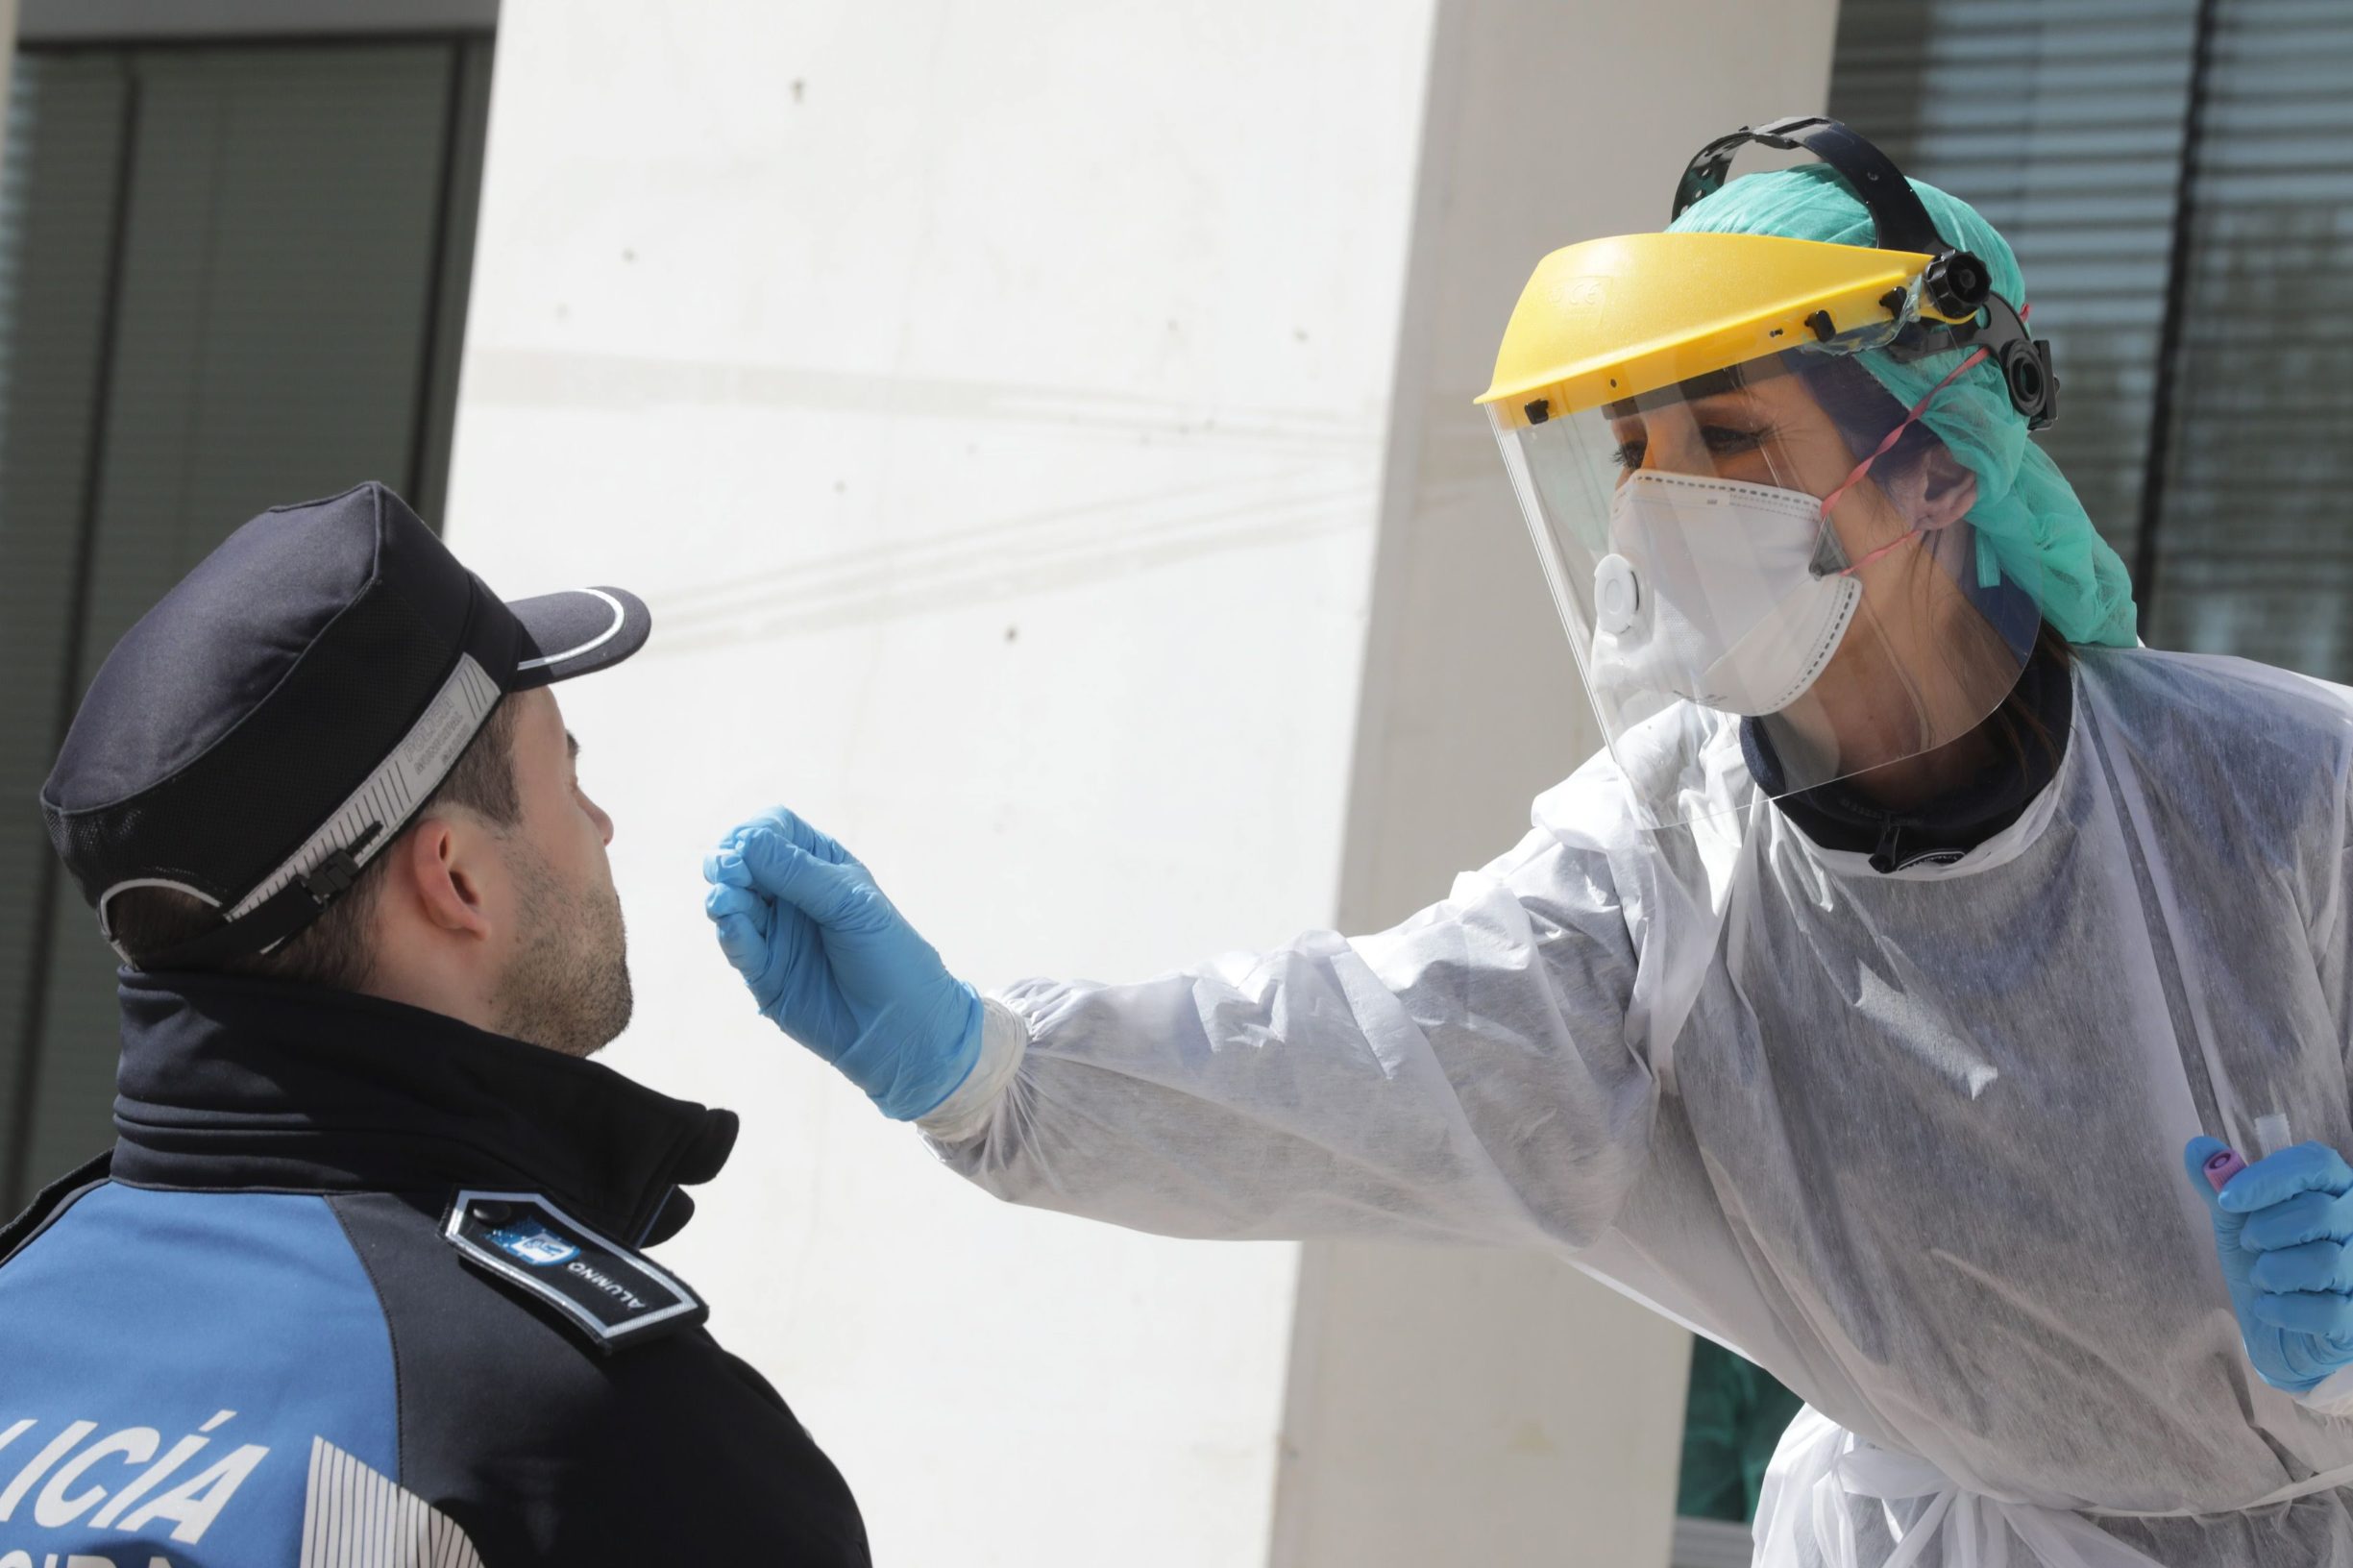 A handout picture released by the Madrid City Hall shows a health worker handling a swab to test a municipal police officer for the COVID-19 coronavirus in Madrid on March 25, 2020. - Spain's coronavirus death toll overtook that of China, rising to 3,434 after another 738 people died as Madrid announced a multi-million-euro deal with Beijing for critical supplies. (Photo by Rafa ALBARRAN / Madrid City Hall / AFP) / RESTRICTED TO EDITORIAL USE - MANDATORY CREDIT 